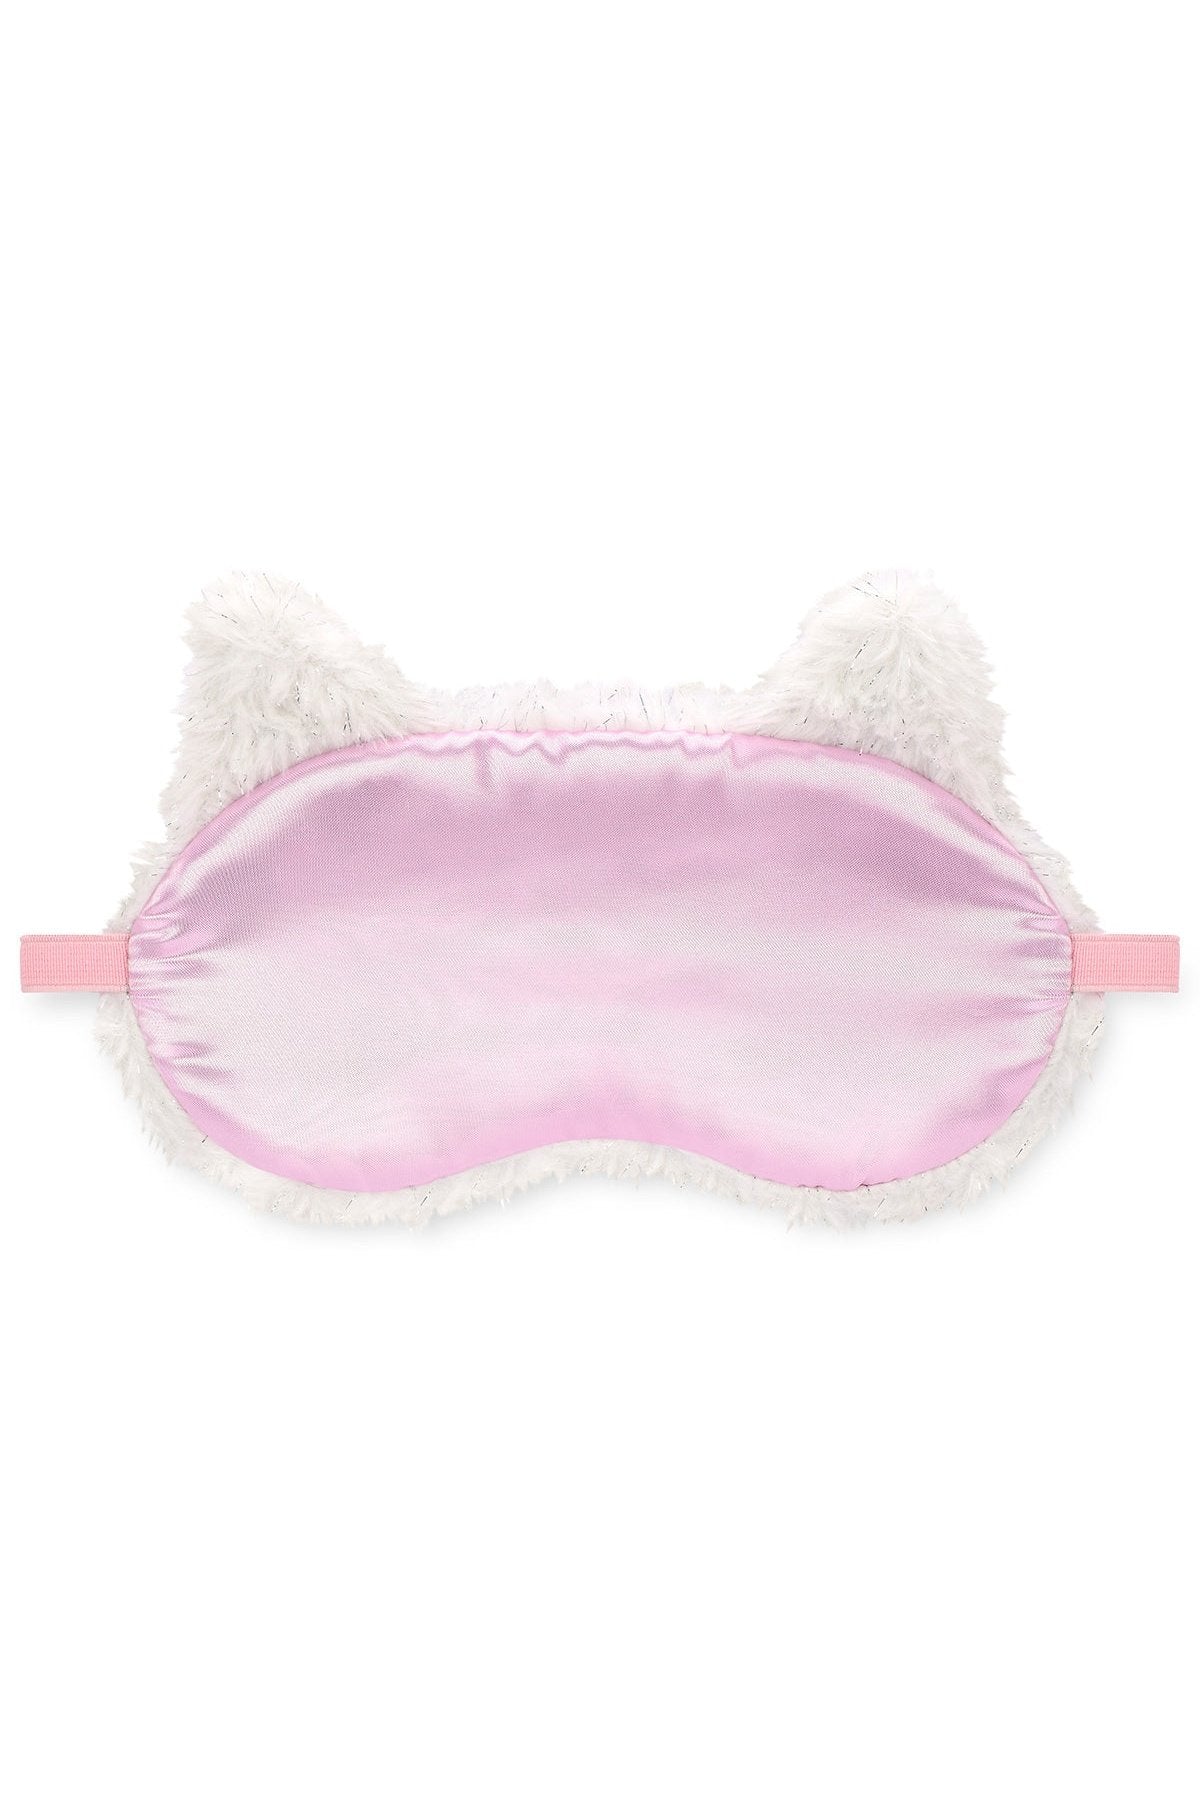 Fluffy Dog Eye Mask Tea for Three: A Children's Boutique